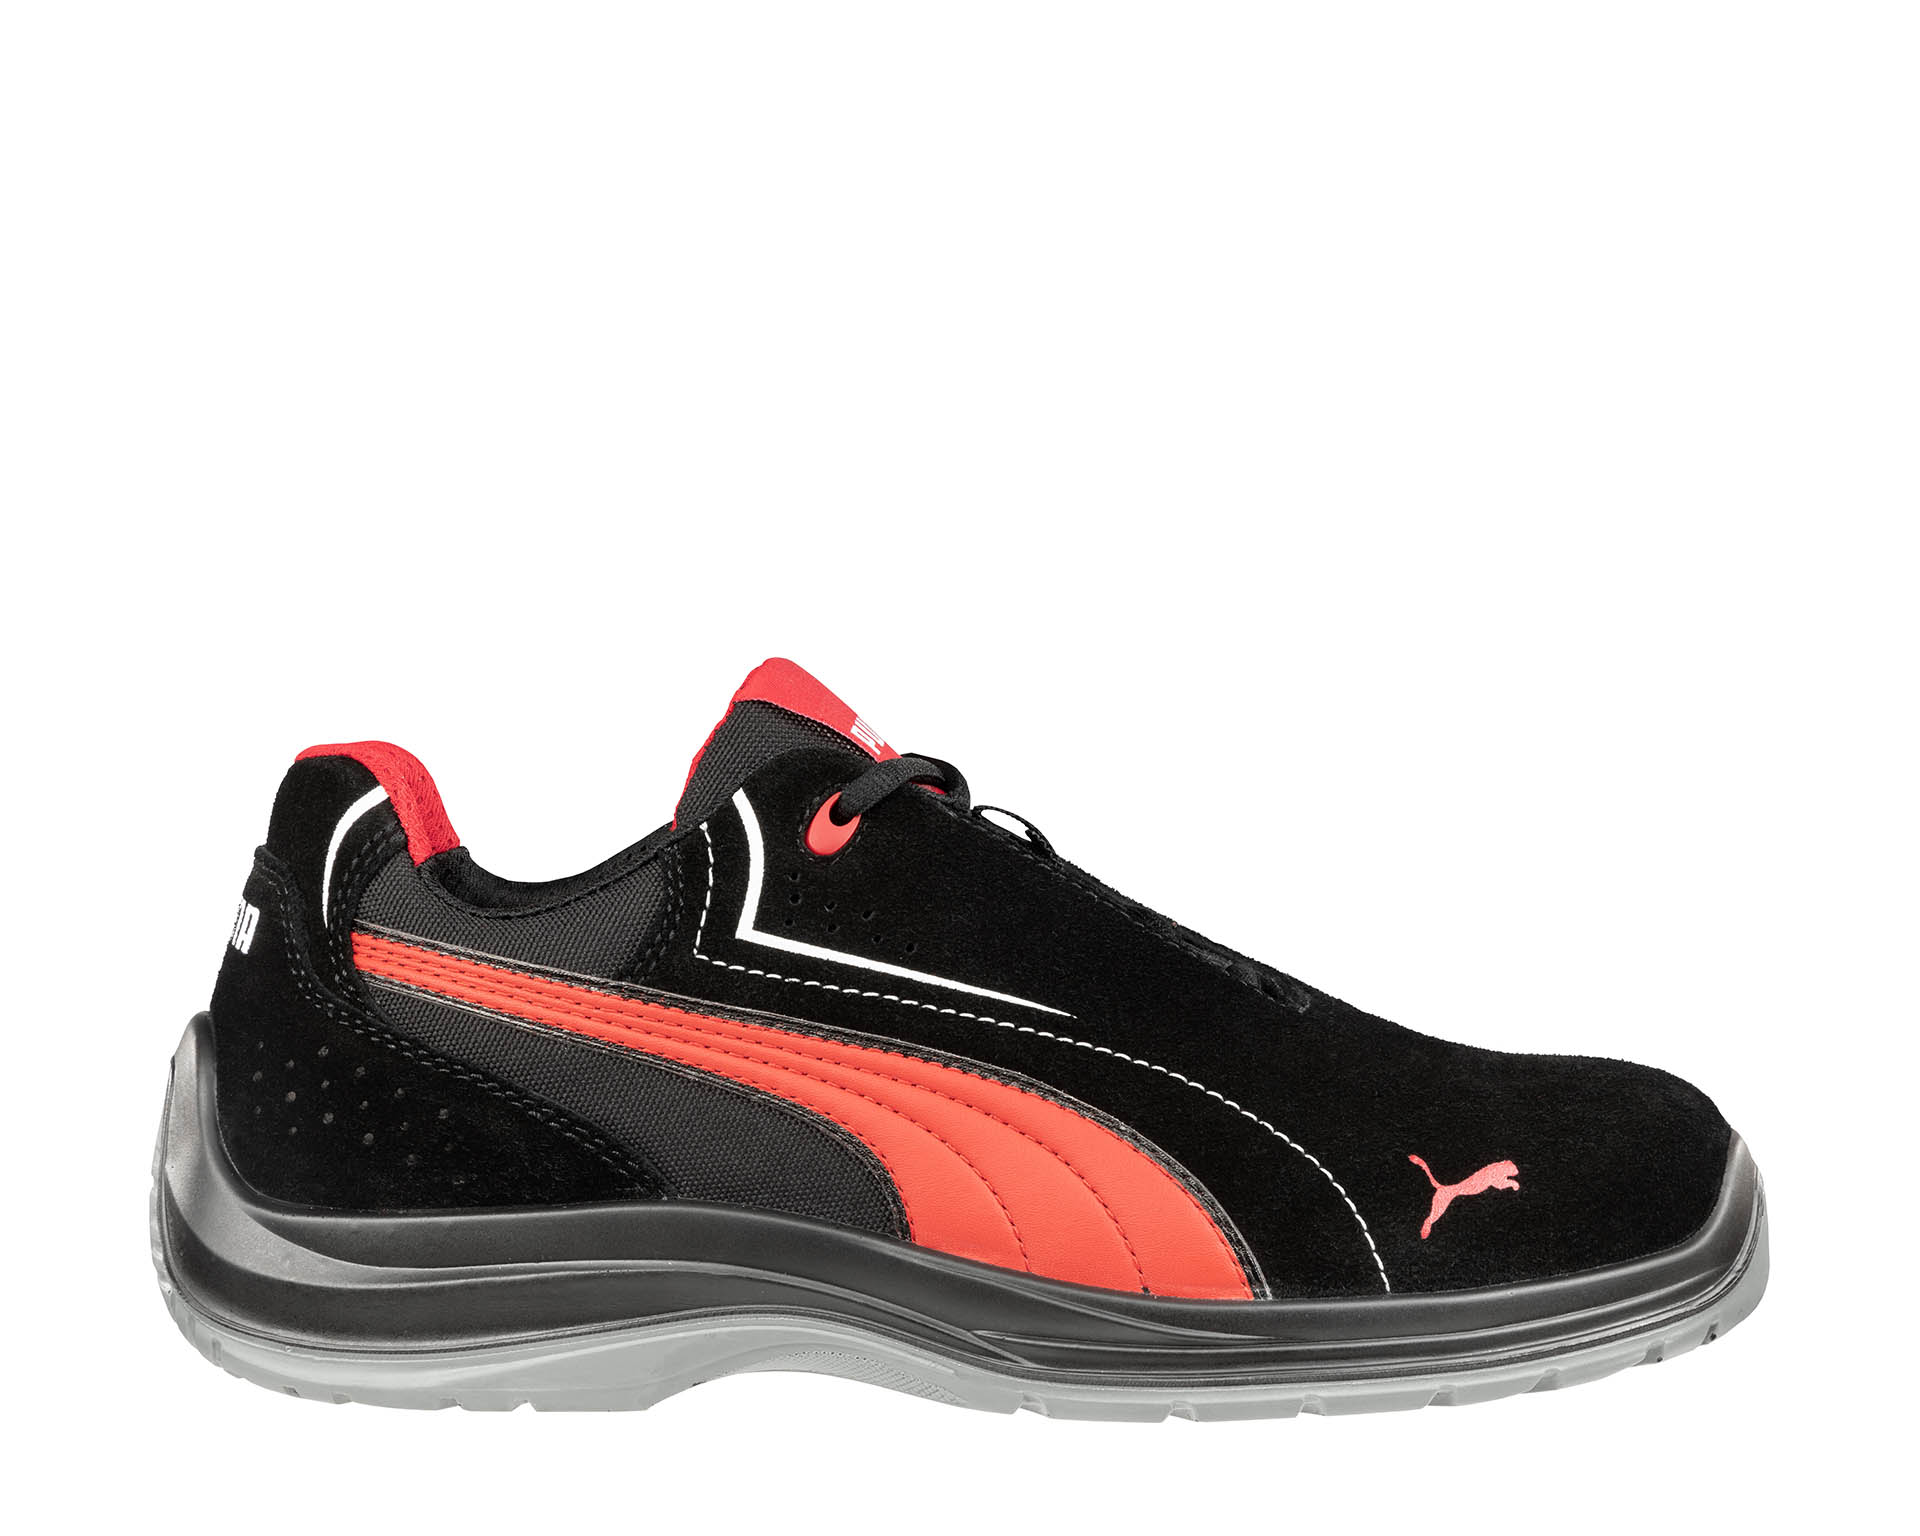 PUMA SAFETY safety shoes S3 Puma TOURING BLACK Safety SRC ESD LOW | English